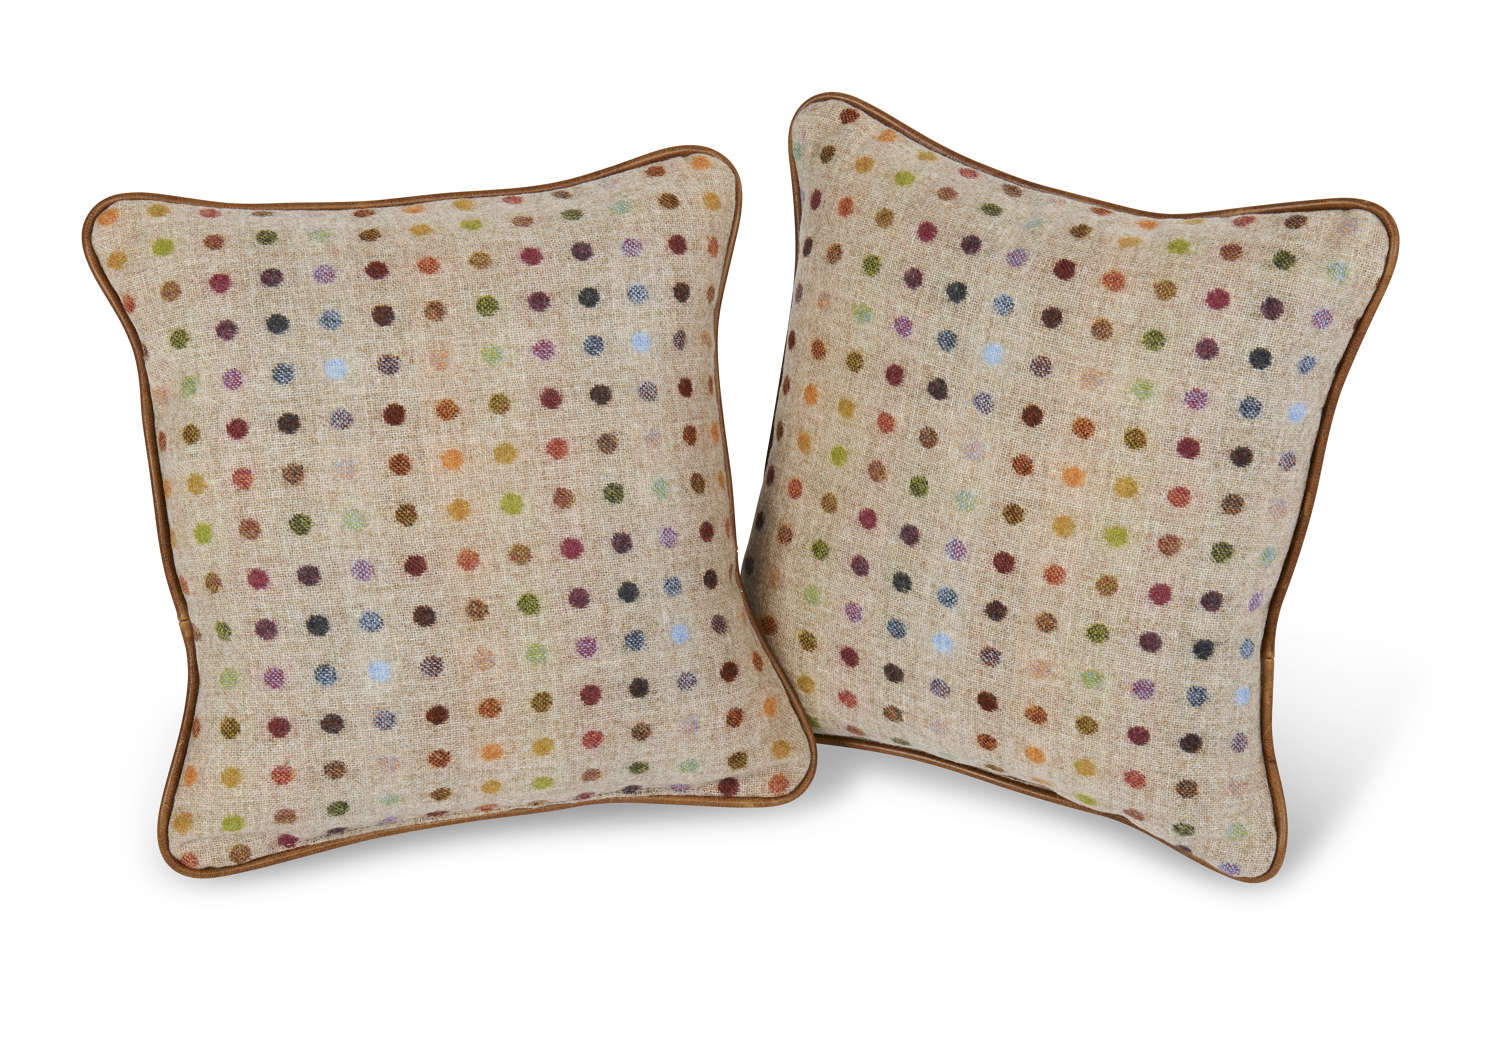 Fabric and Leather Piped Cushion